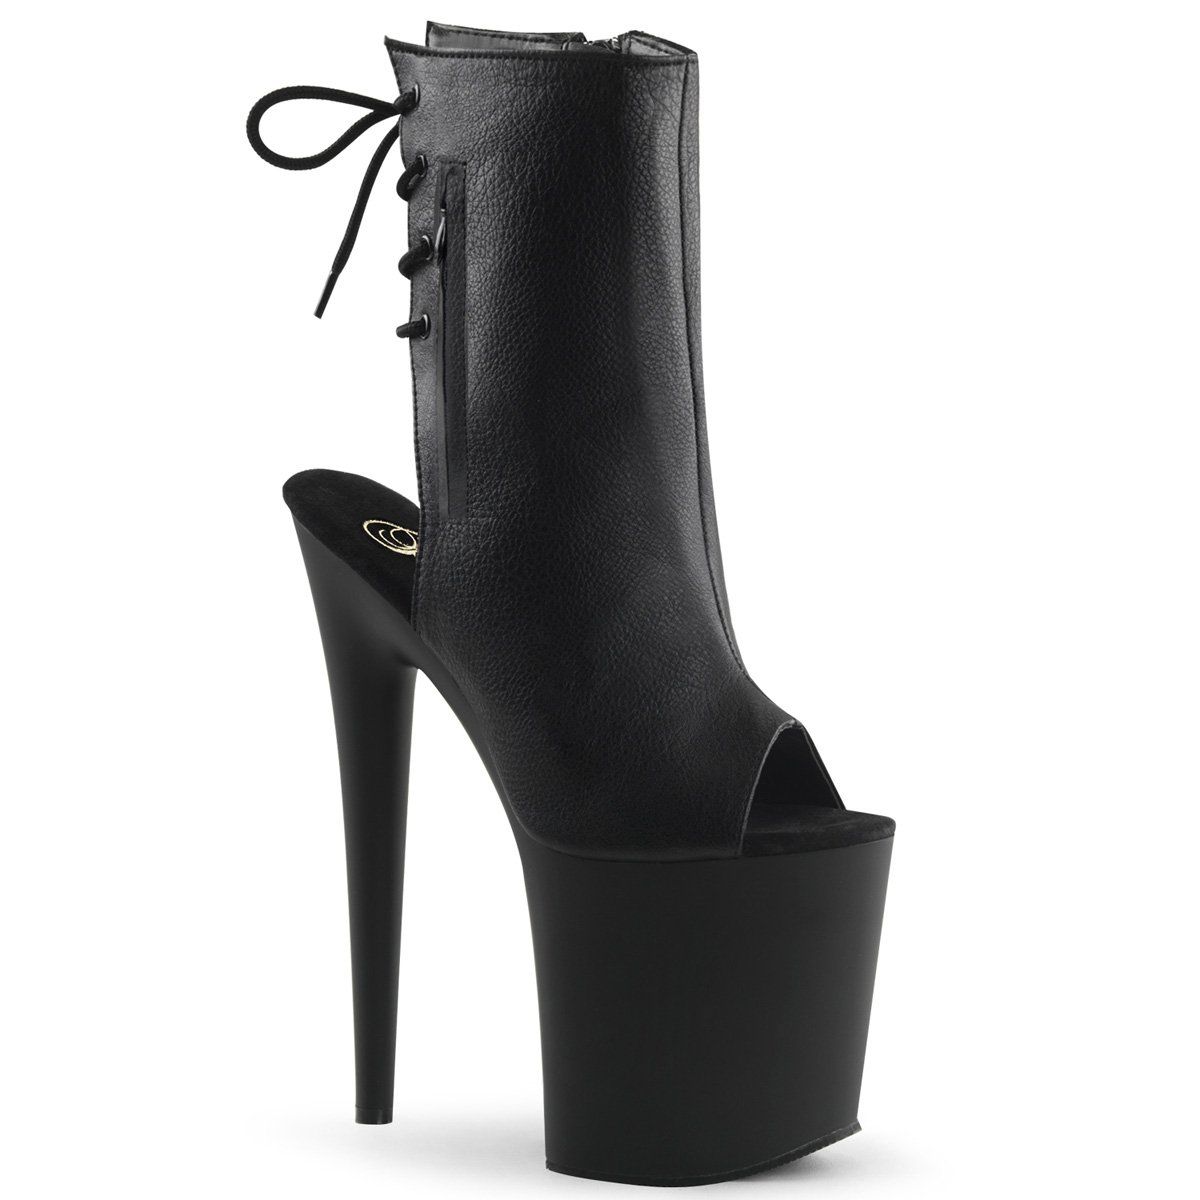 FLAMINGO-1018 Black Faux Leather Ankle Boot Pleaser